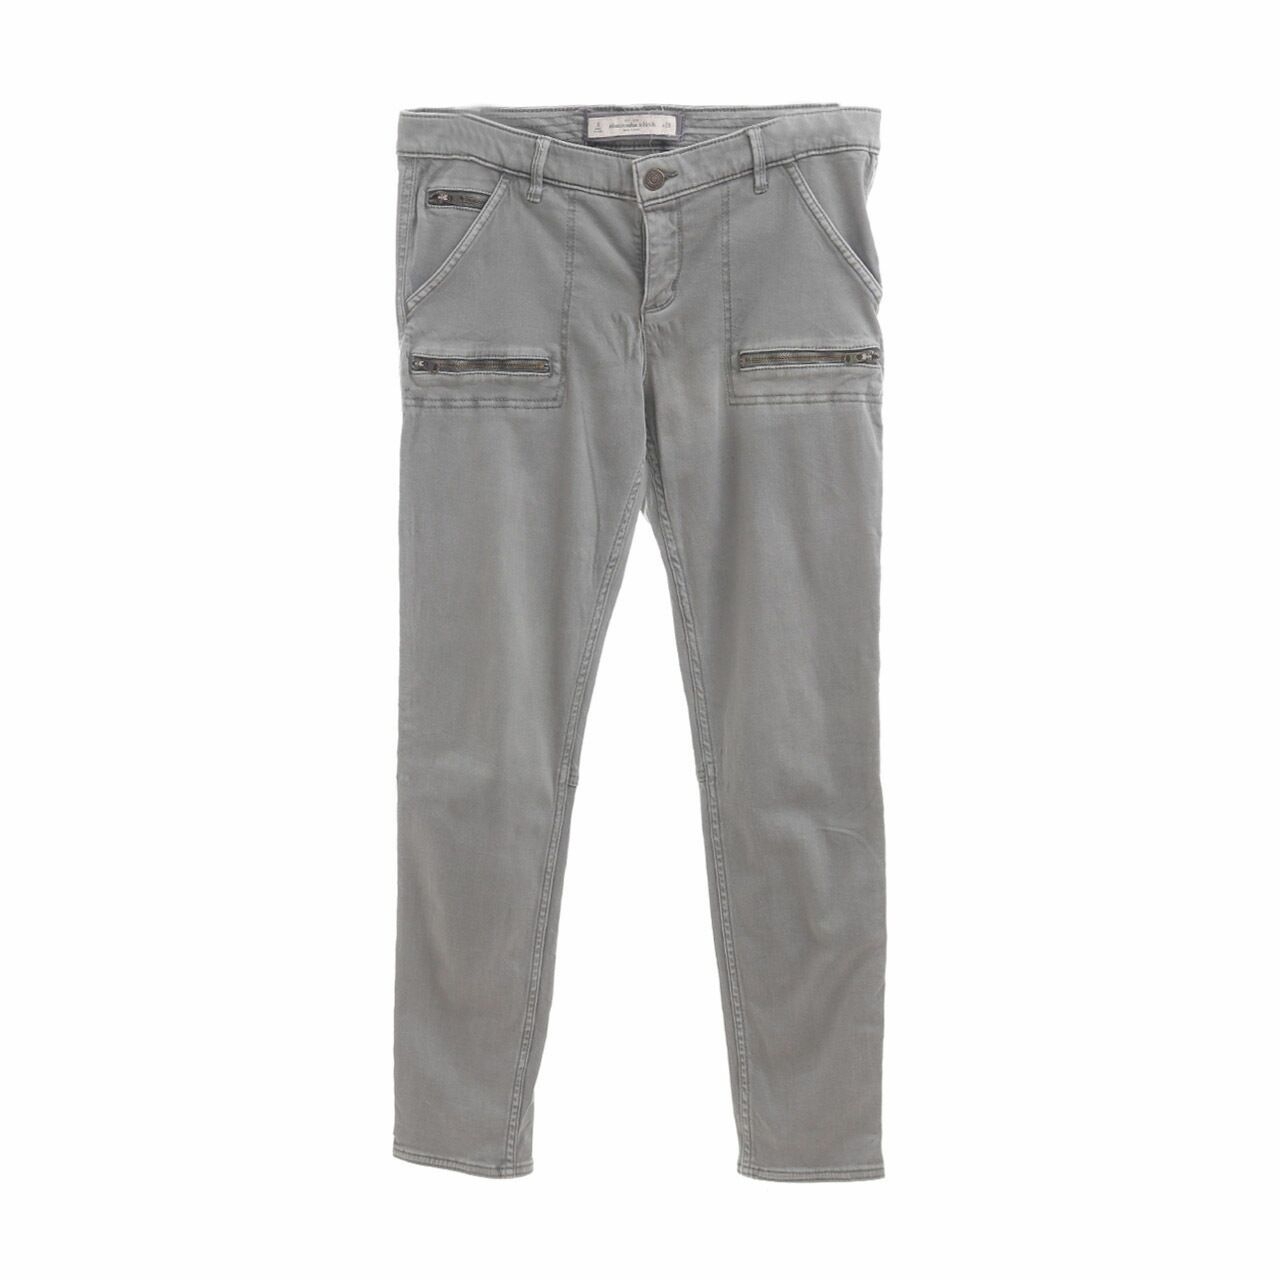 Abercrombie & Fitch Green Washed Long Pants